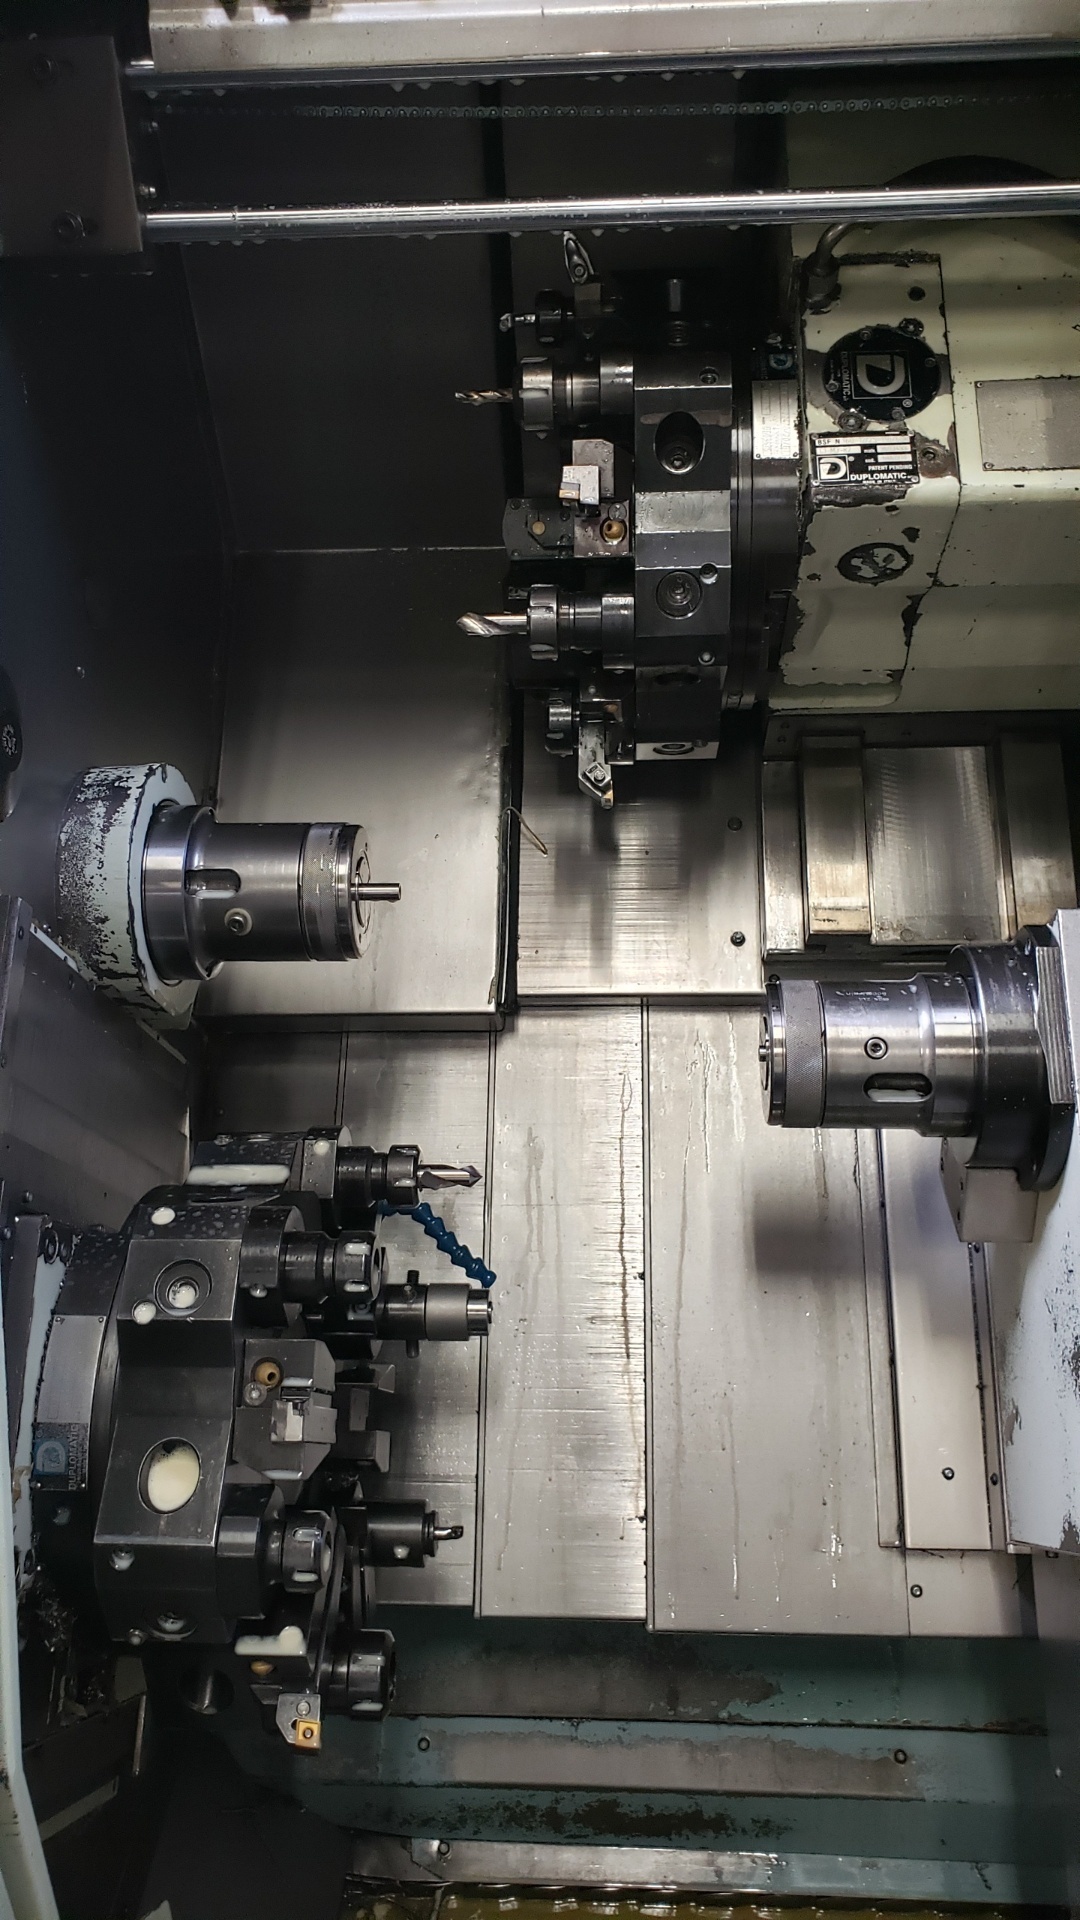 EUROTECH 420SLL 5-Axis or More CNC Lathes | CNC Digital, Inc.